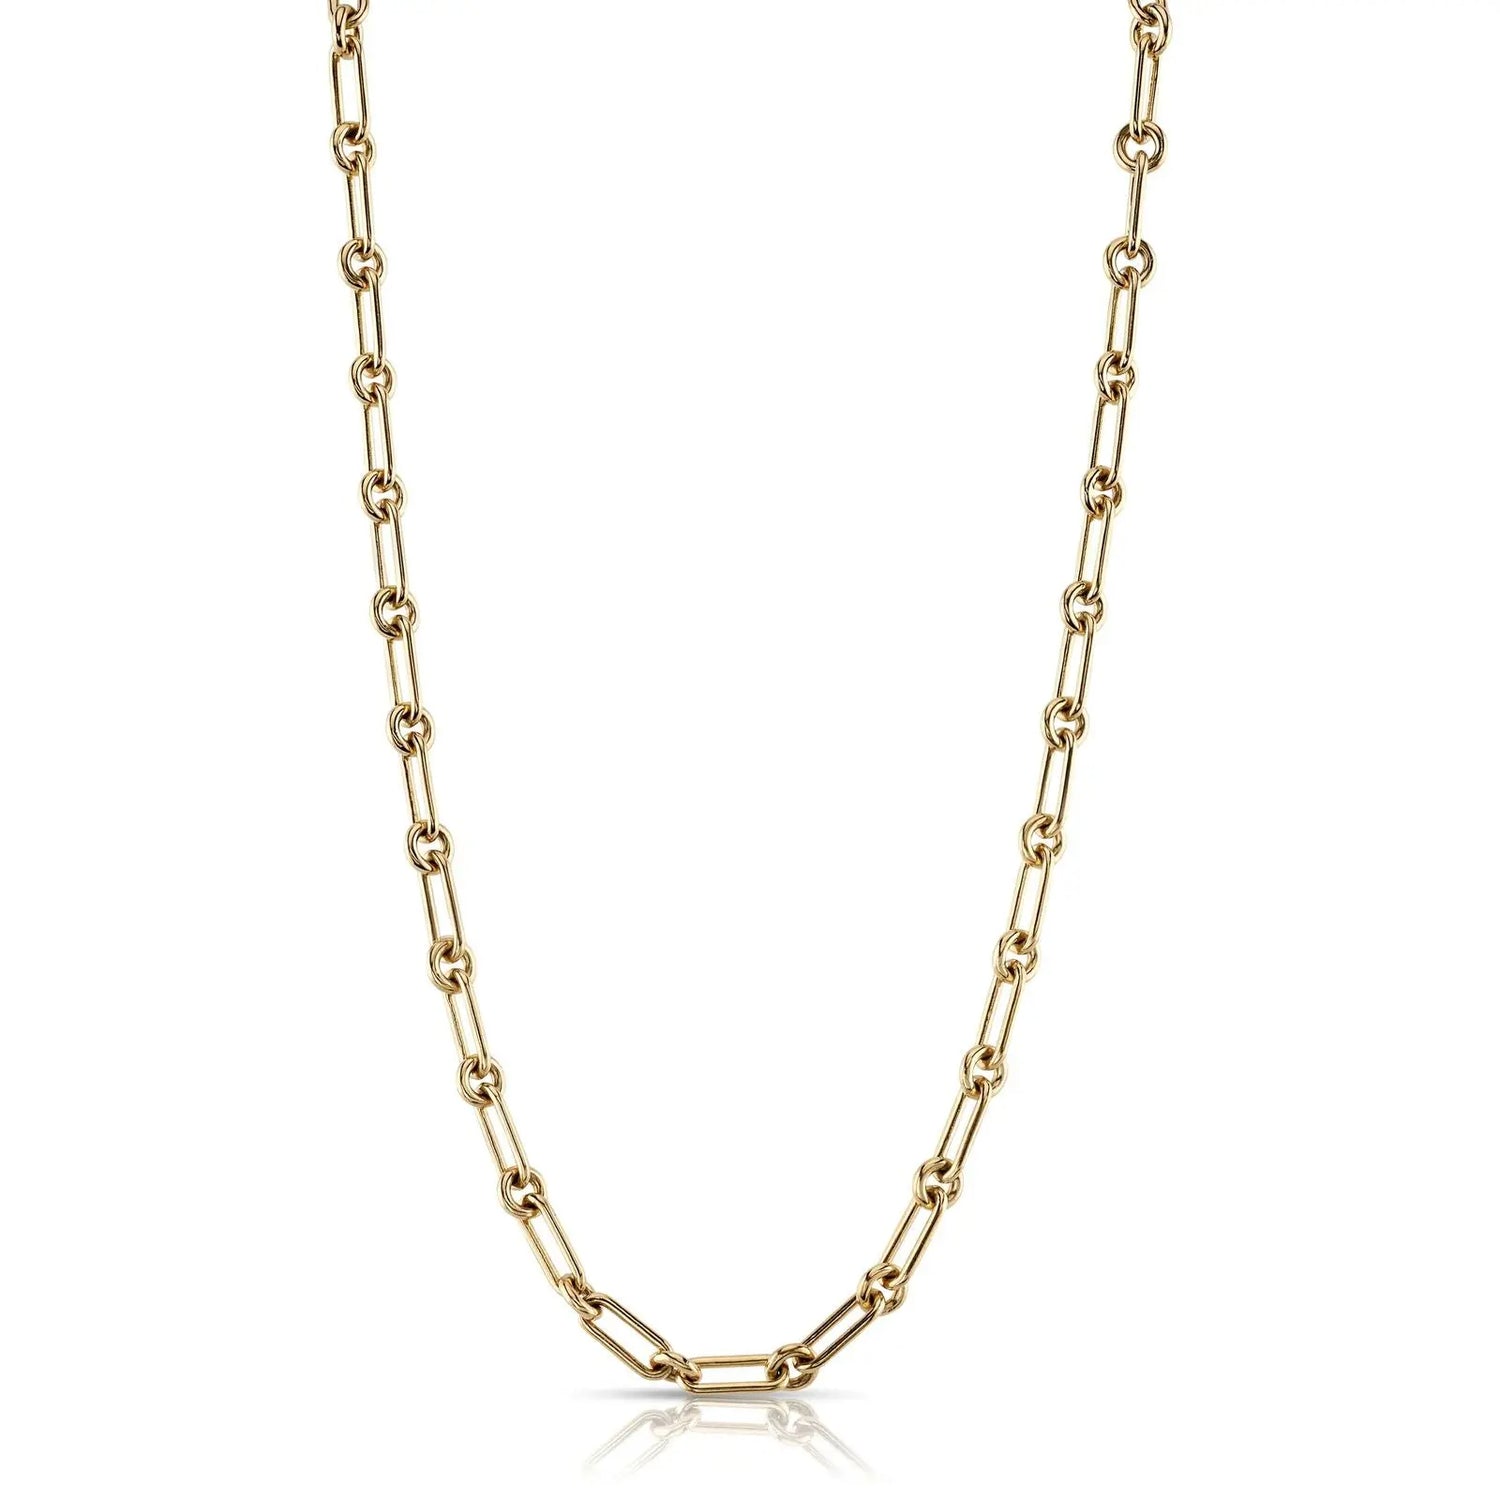 Handcrafted 18K Yellow gold long and round link necklace. Handmade Clasp.  Necklace measures 17".  If an item is out of stock, please allow 6-8 weeks for delivery.  Designed by Single Stone and made in LA